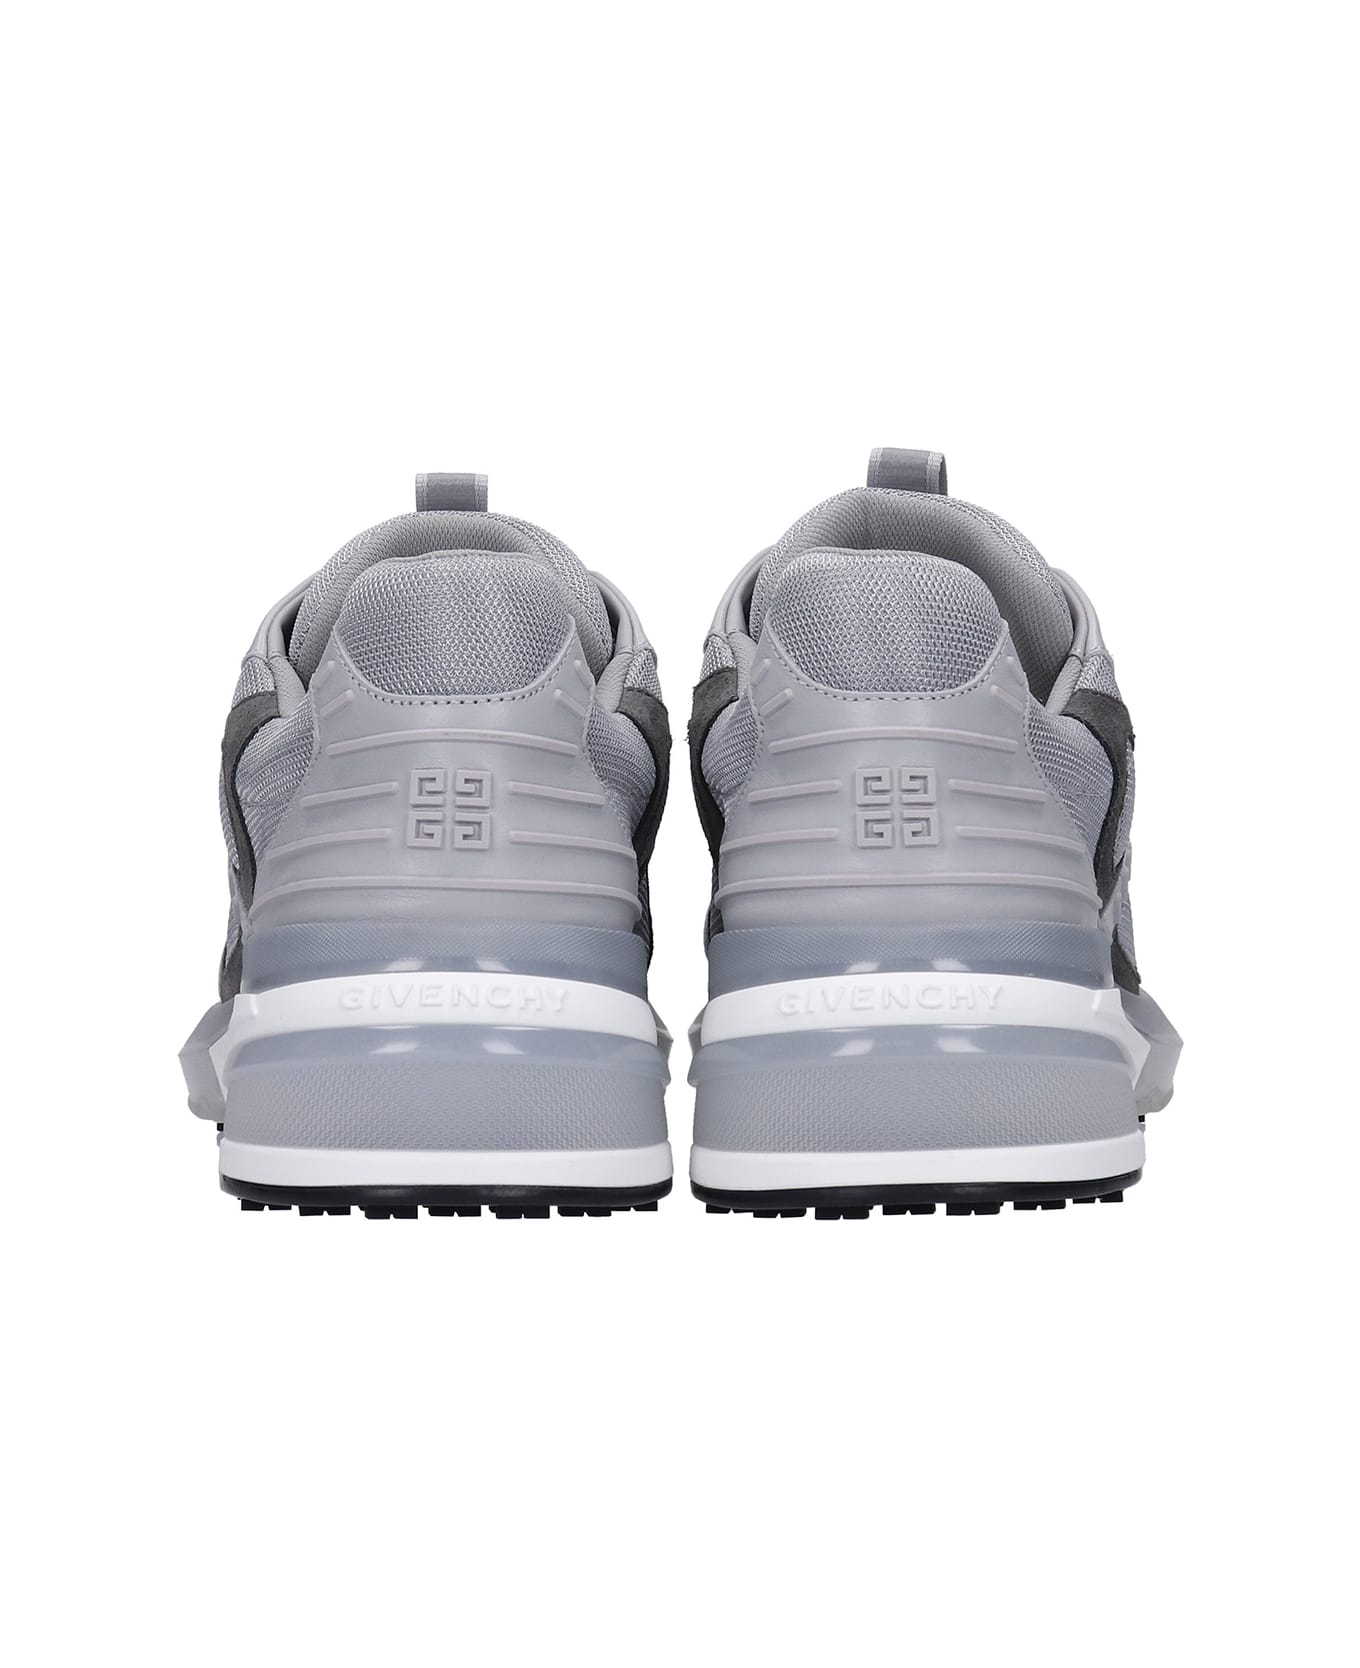 Givenchy Giv 1 Tr Low Sneakers In Grey Polyester - grey